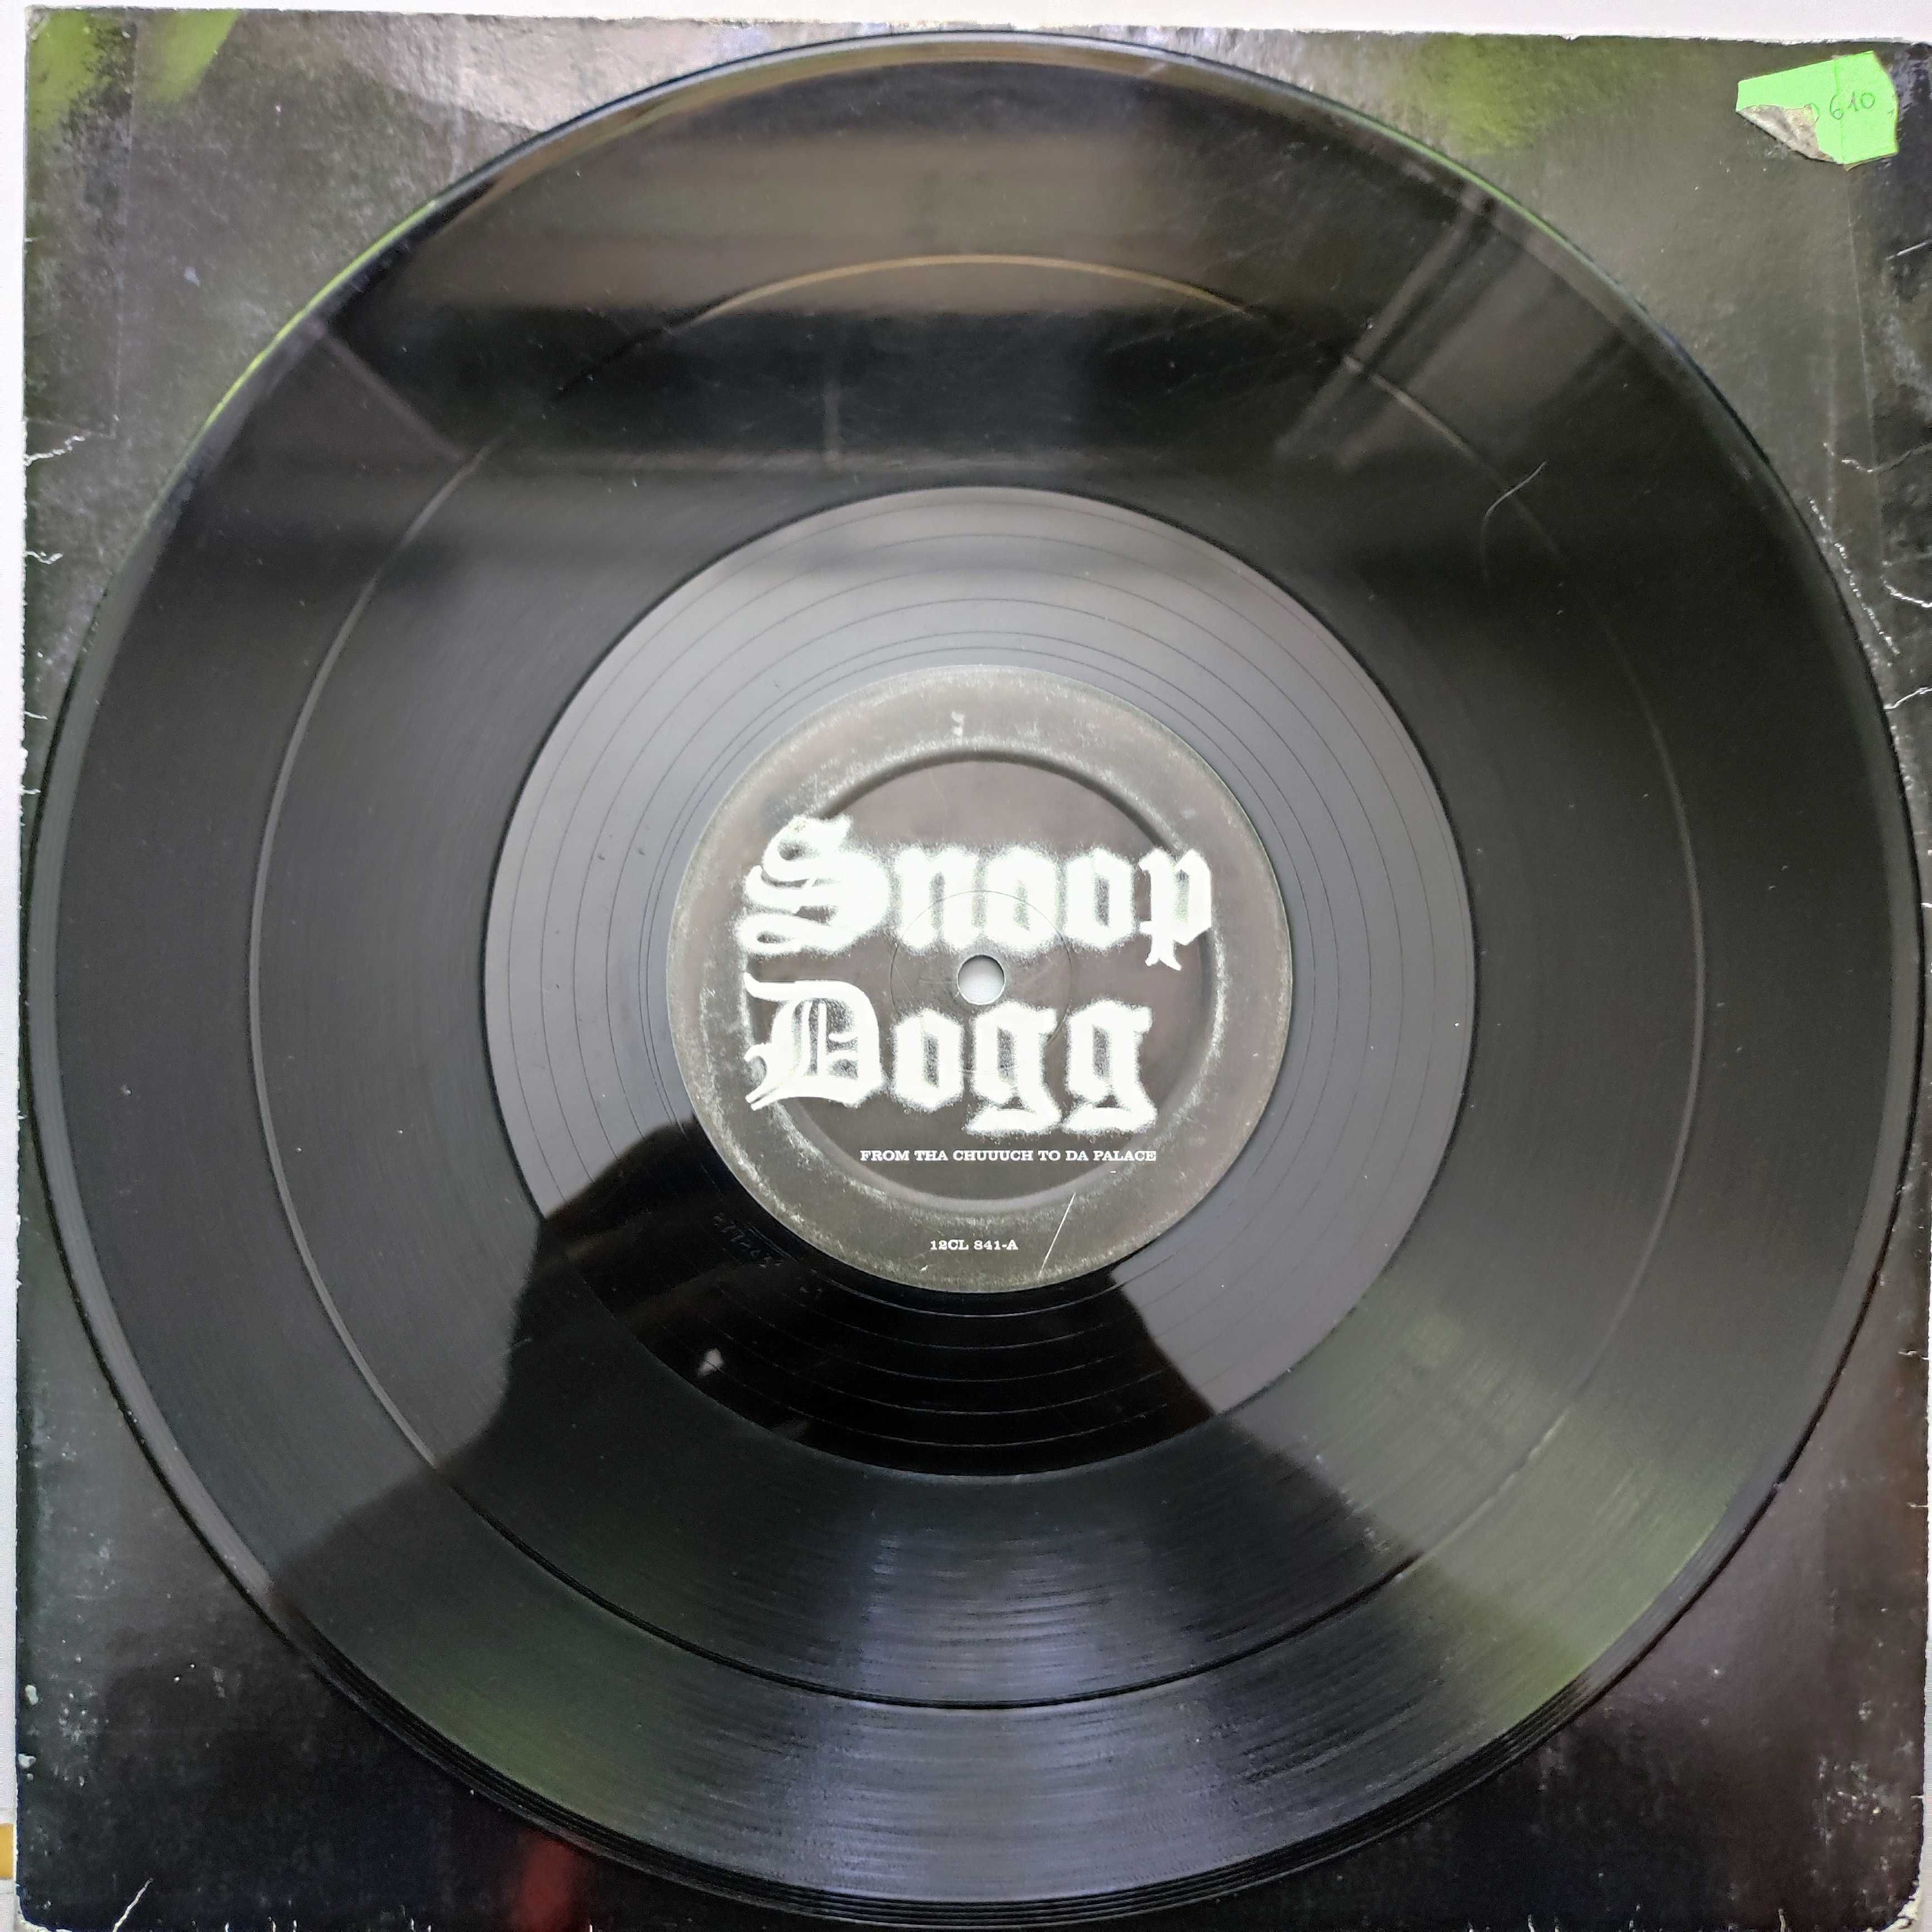 Snoop Dogg - From Tha Chuuuch.. wyd 2002r PRIORITY) LP 12" winyl